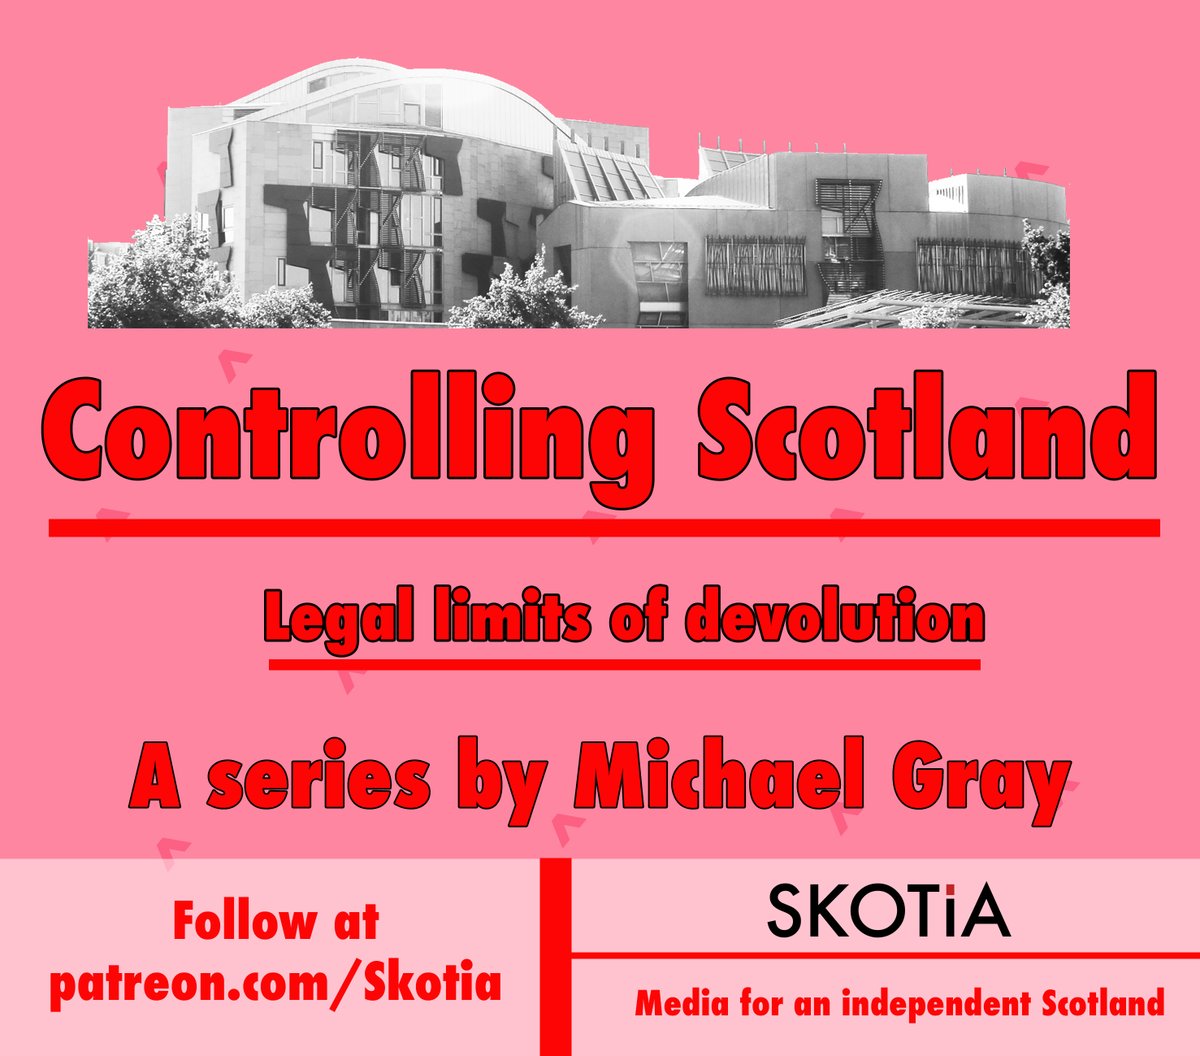 A big part is with  @TheSkotia. On our Patreon I’m publishing a monthly episode on ‘Controlling Scotland: the legal limits of devolution’. So if you found this interesting, please support us there & you’ll get far more like it in the months ahead!  http://patreon.com/skotia 